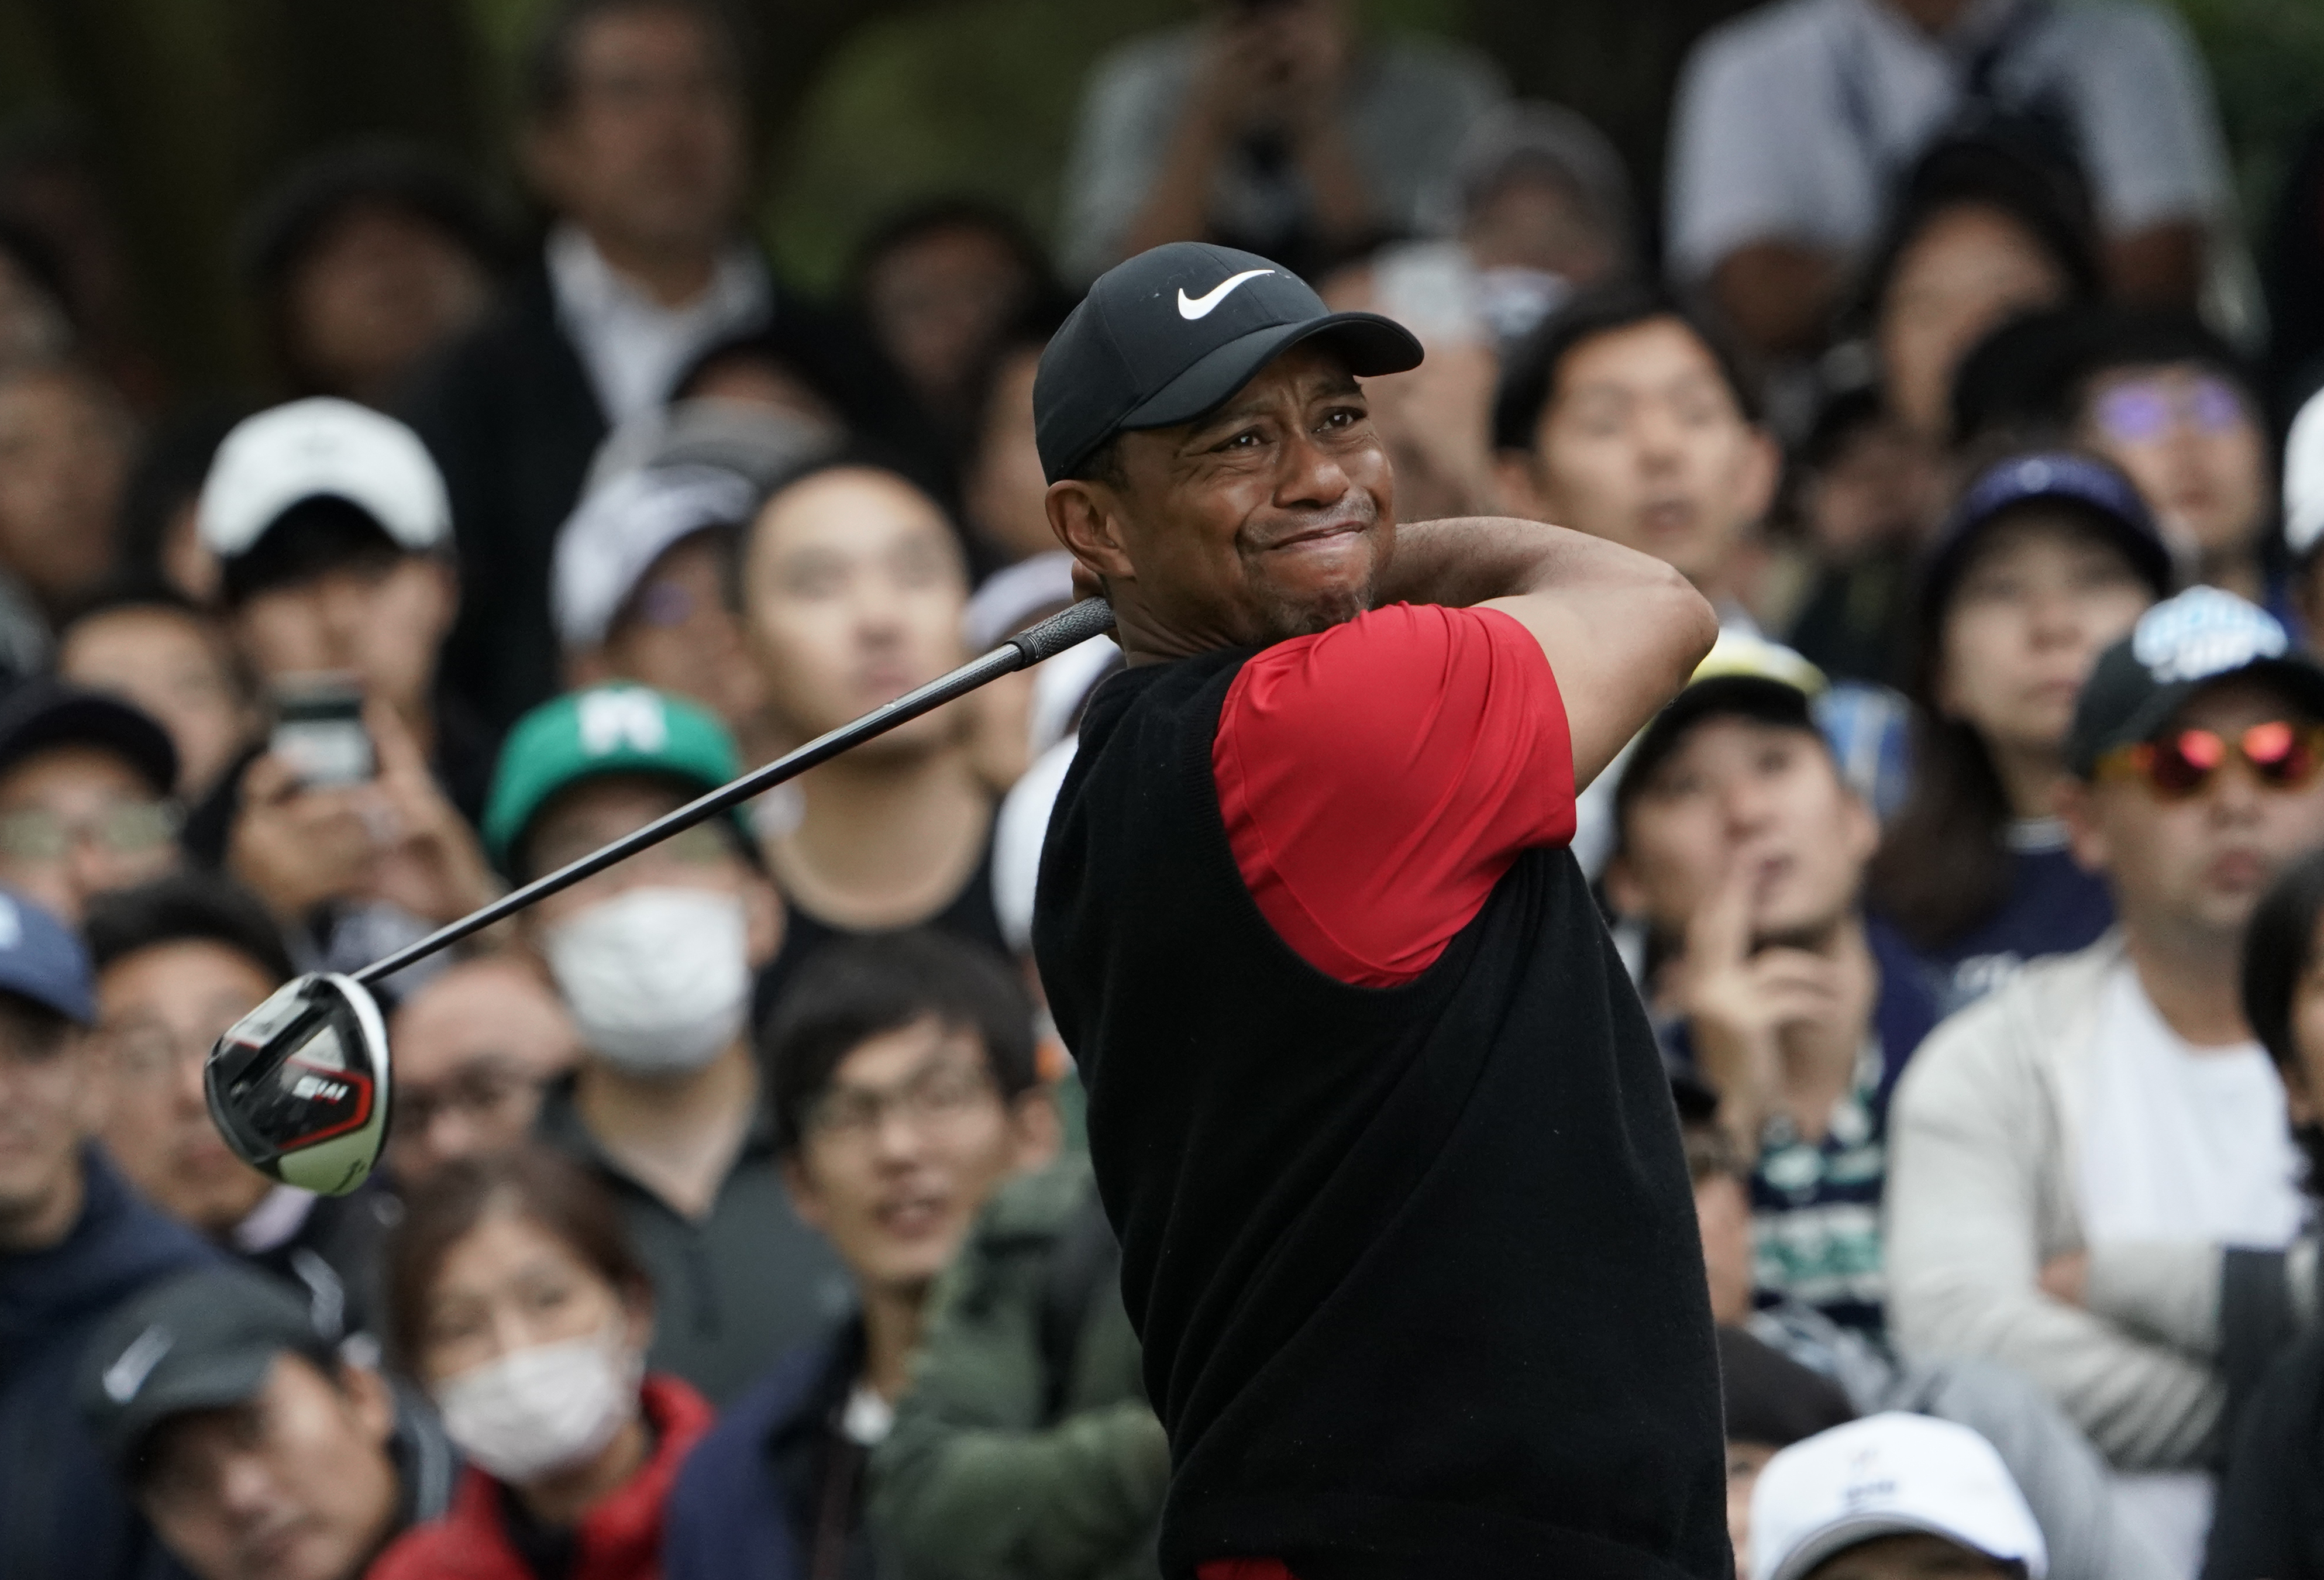 Tiger Woods ties Sam Snead's PGA Tour victory record at 82